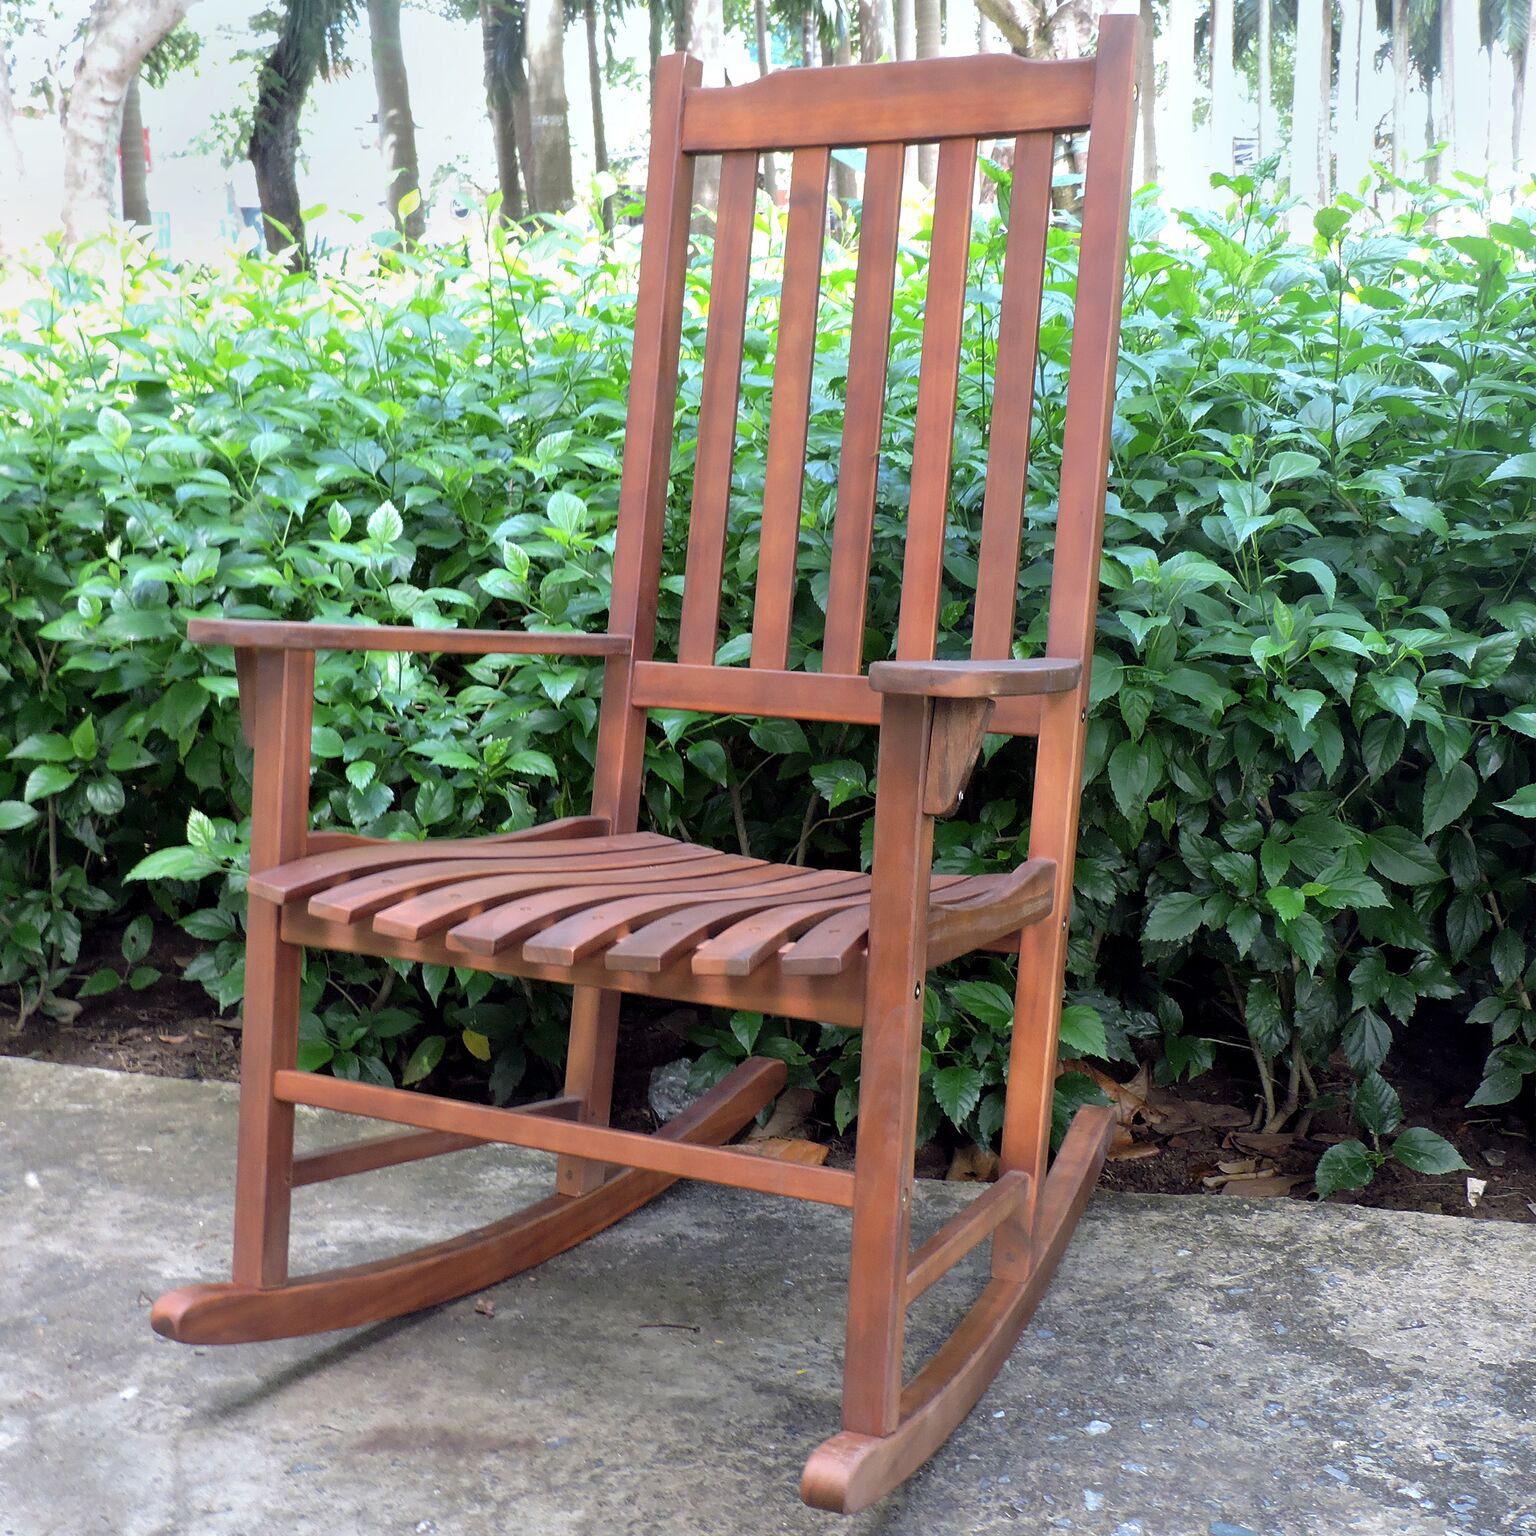 Northbeam Indoor Outdoor Acacia Wood Traditional Rocking Chair, Natural Stained - image 3 of 5